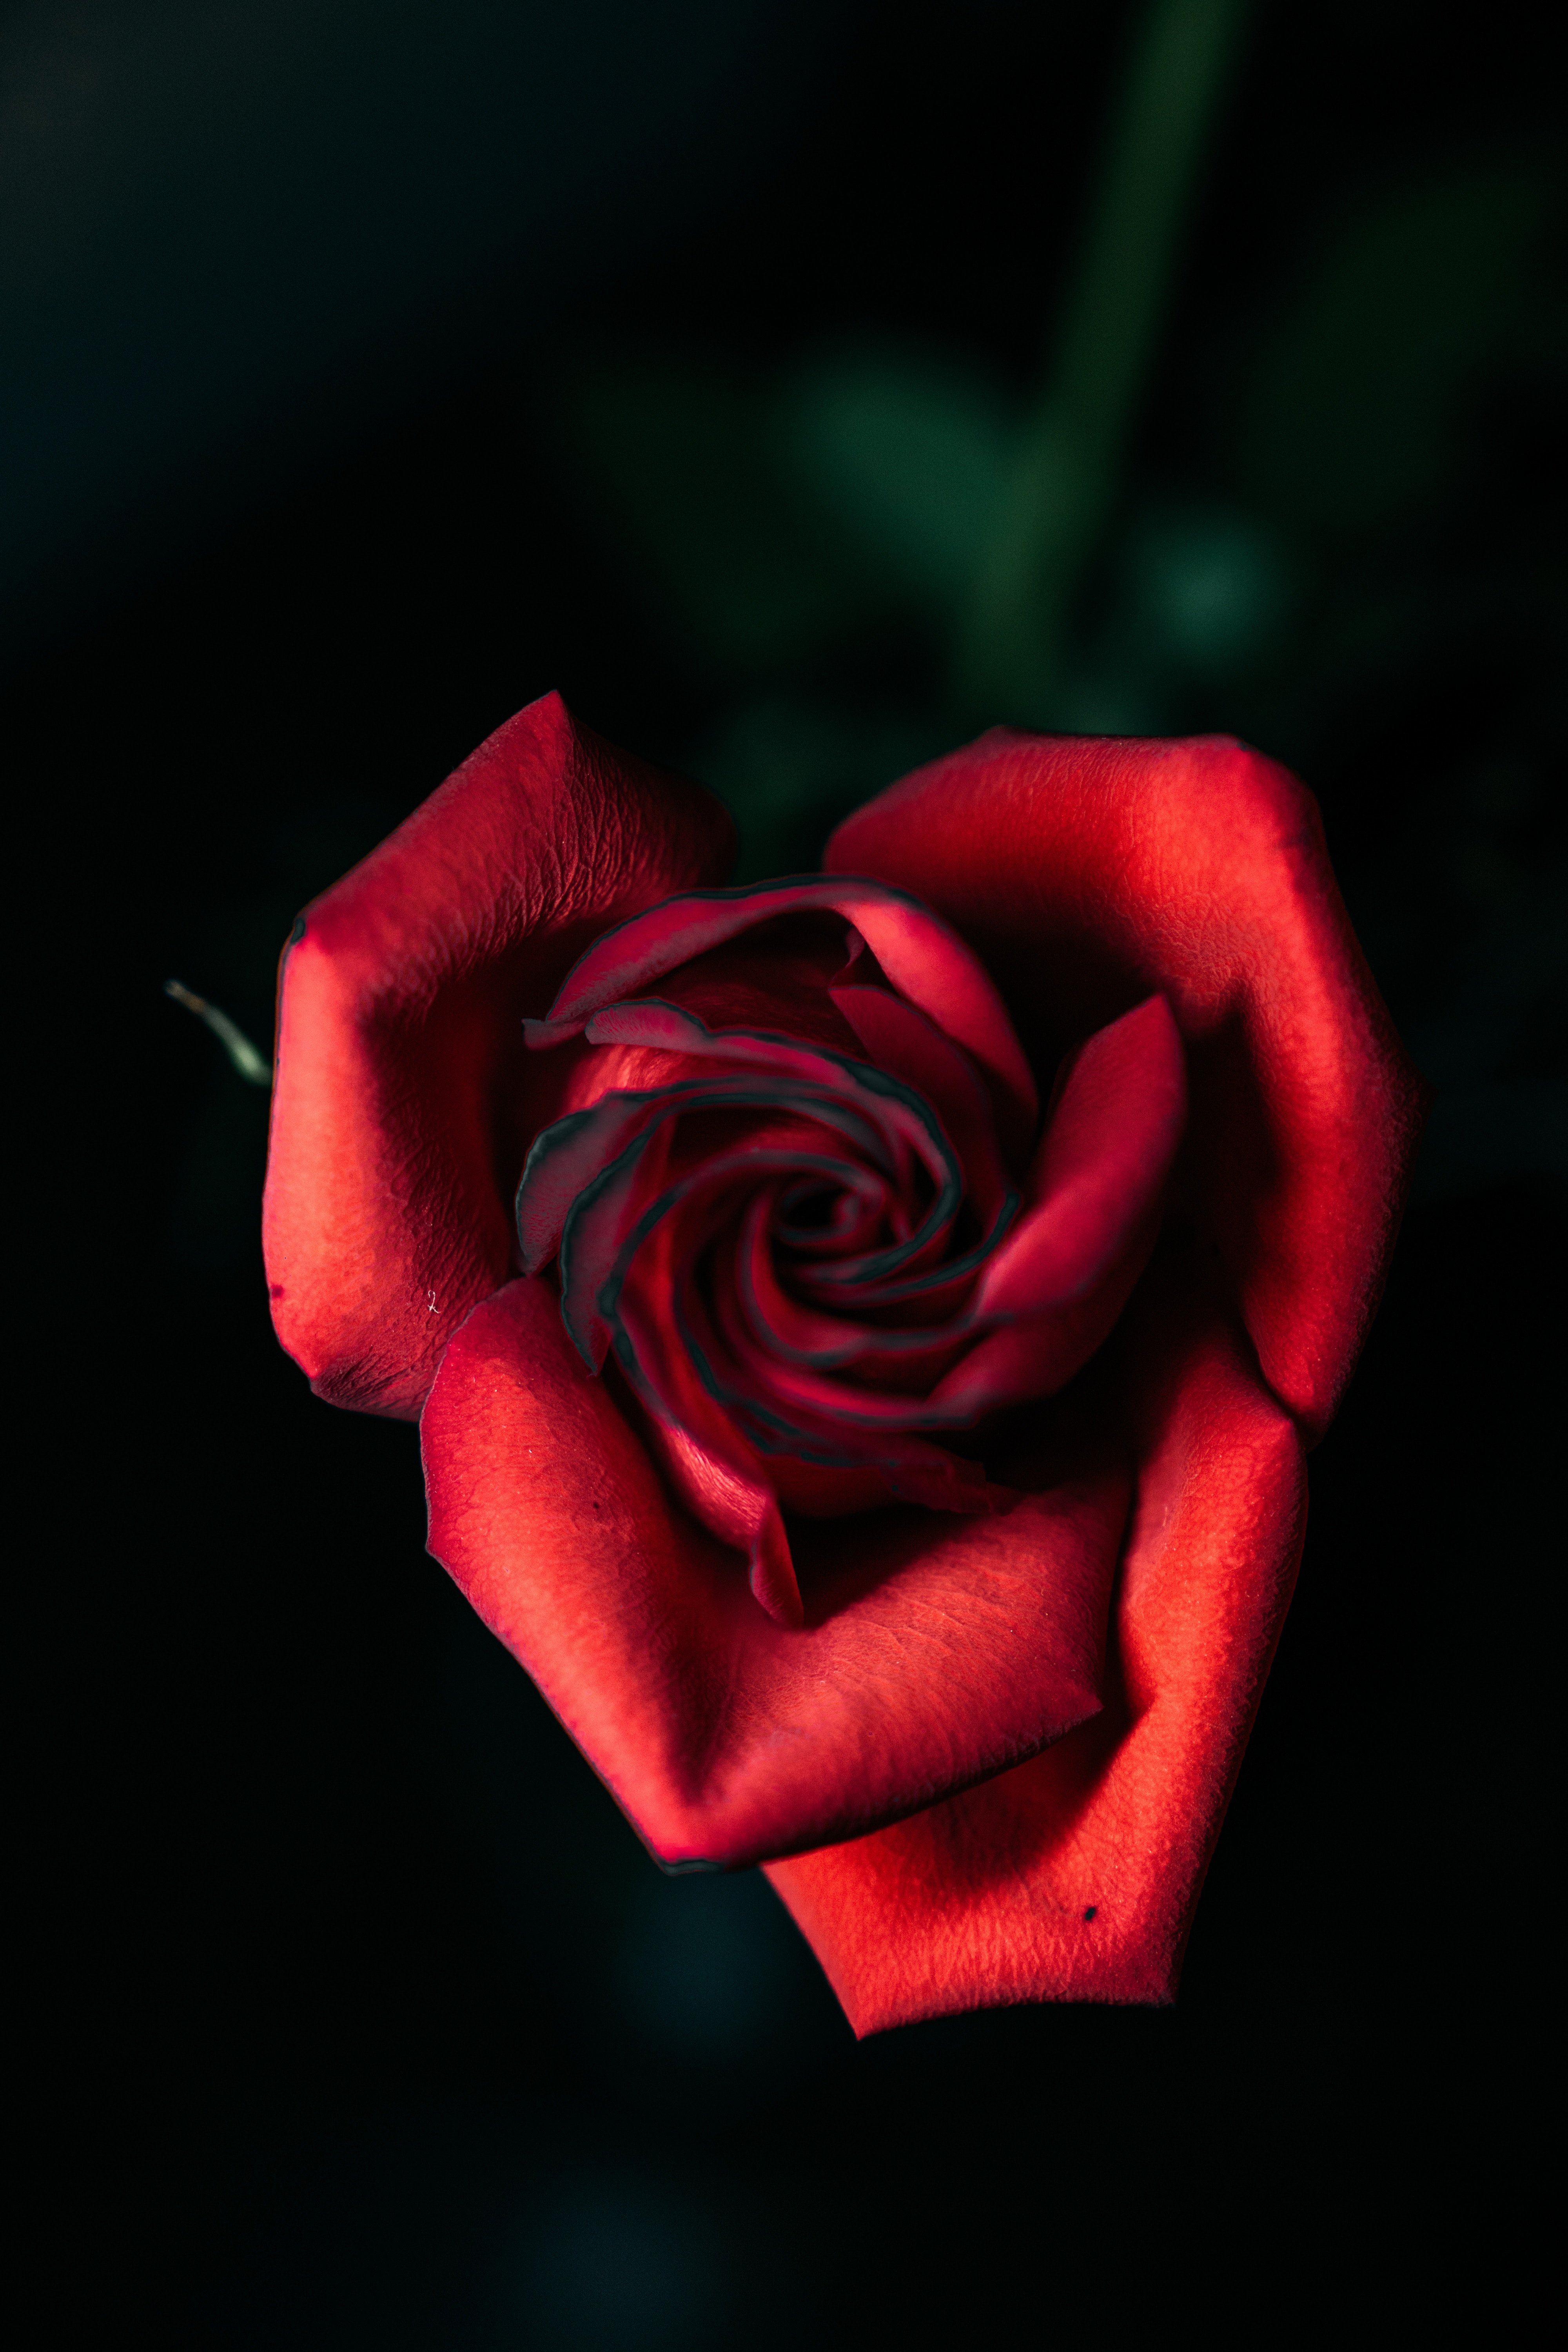 close up, rose, flowers, red, rose flower, petals, bud cell phone wallpapers